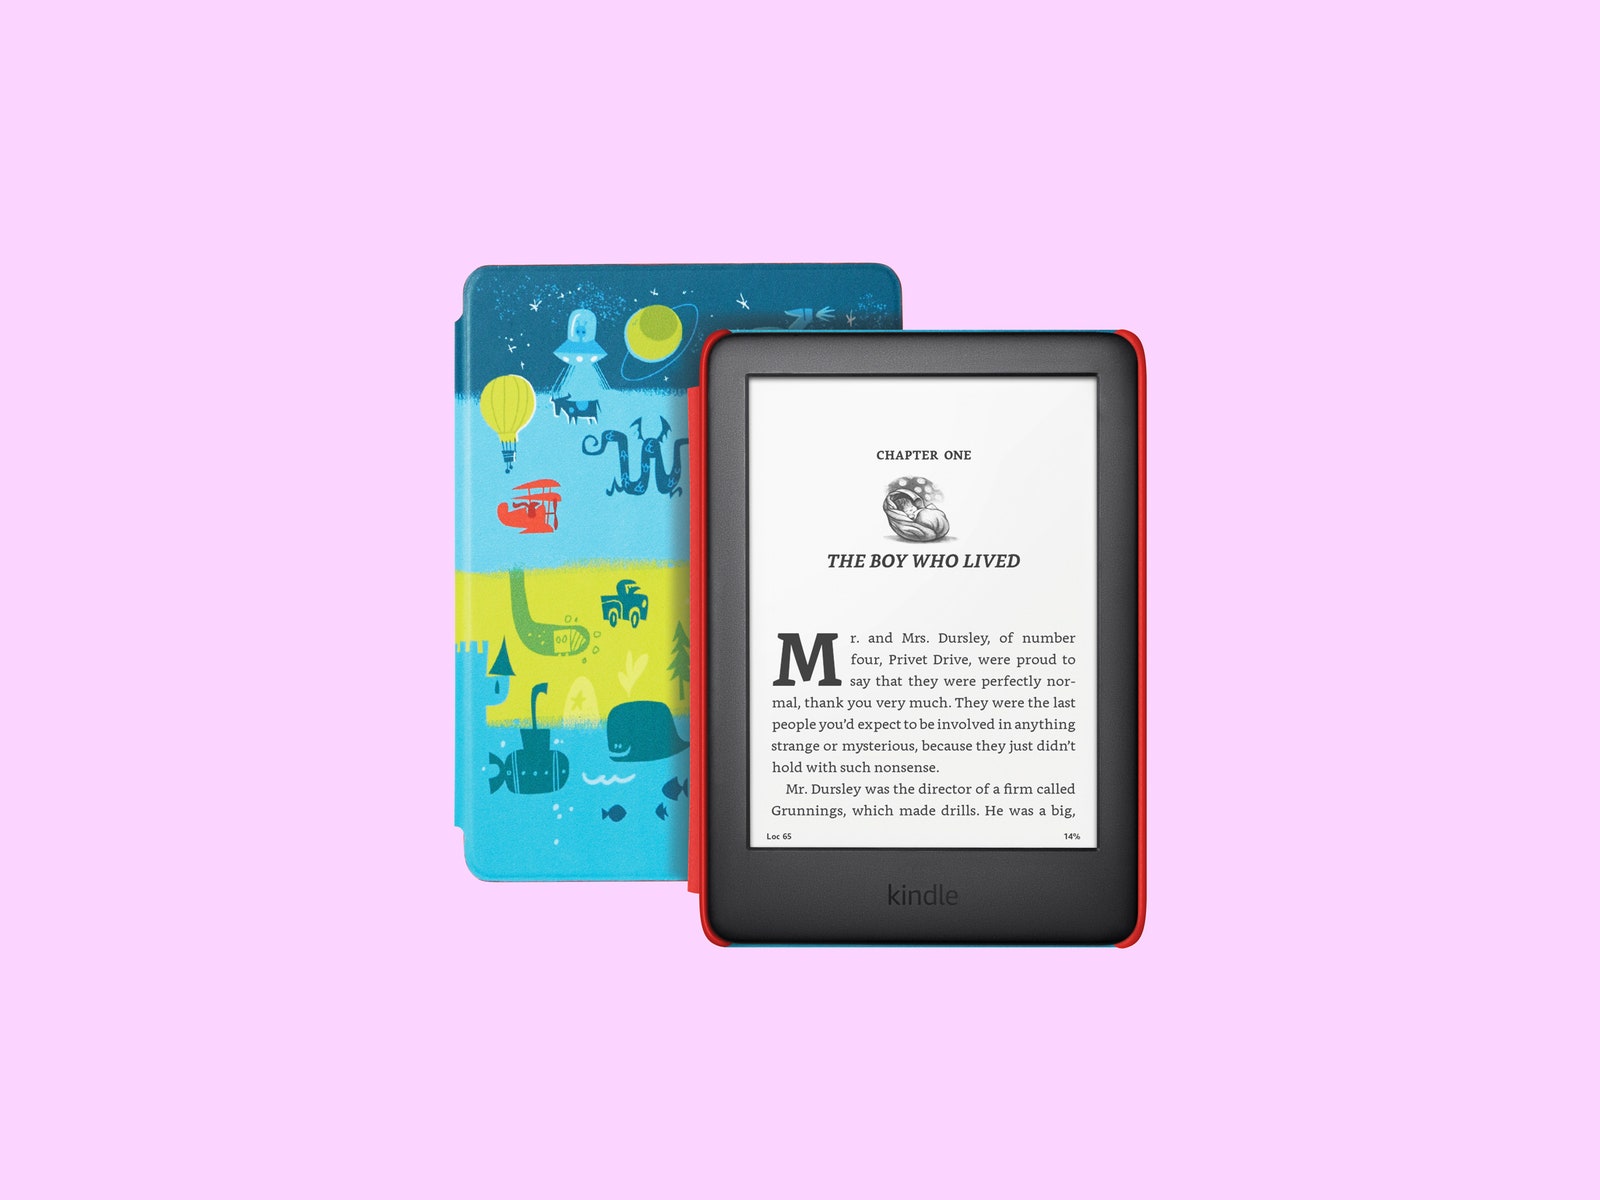 amazon kindle with kidlike illustrations on the front cover